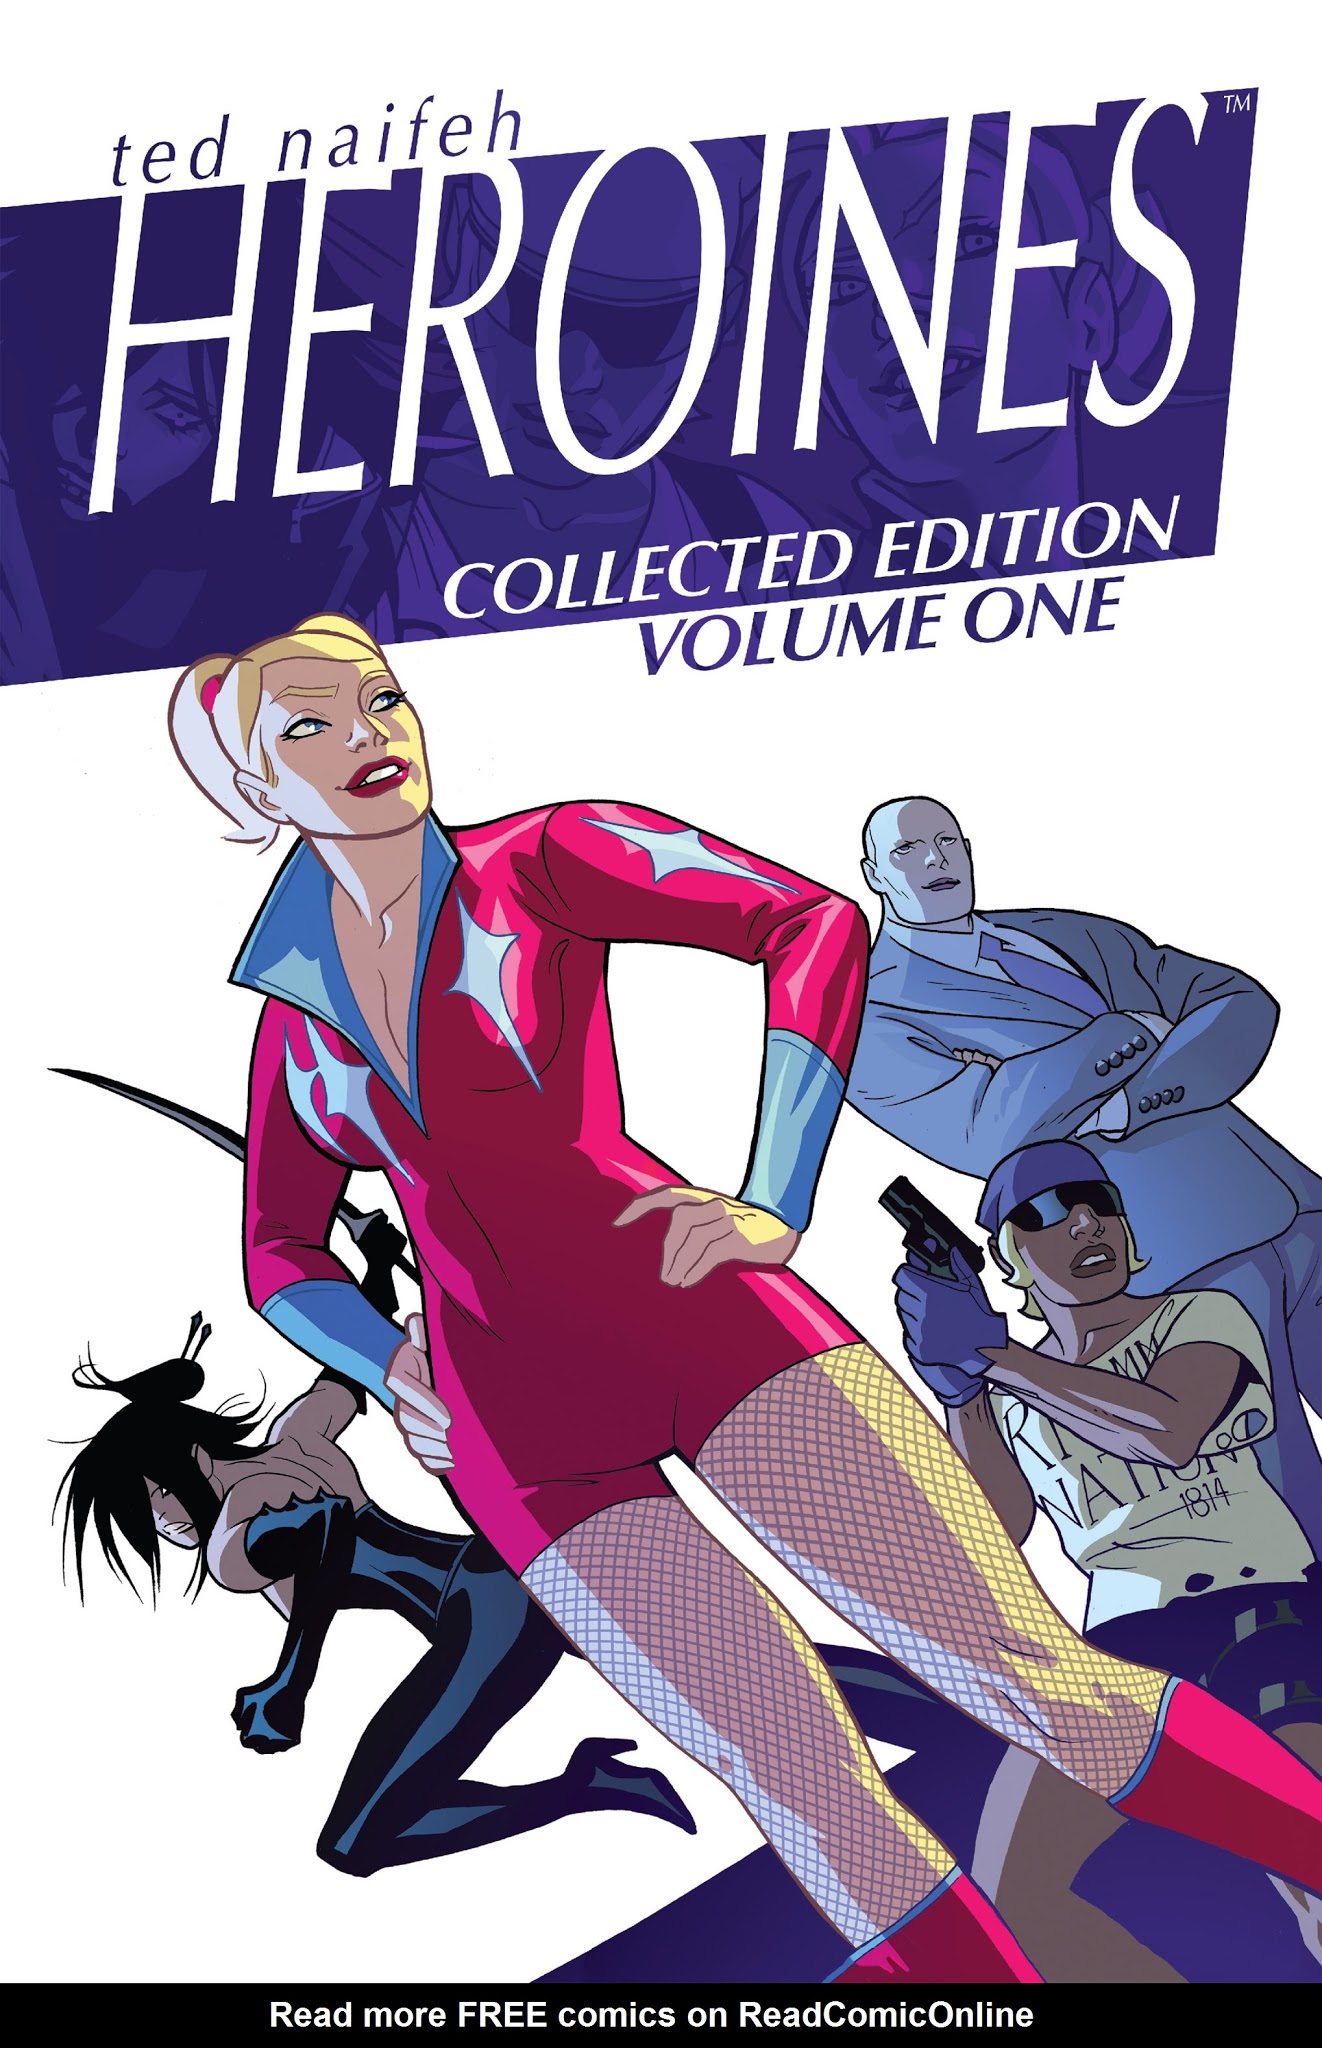 Read online Heroines comic -  Issue # TPB - 1